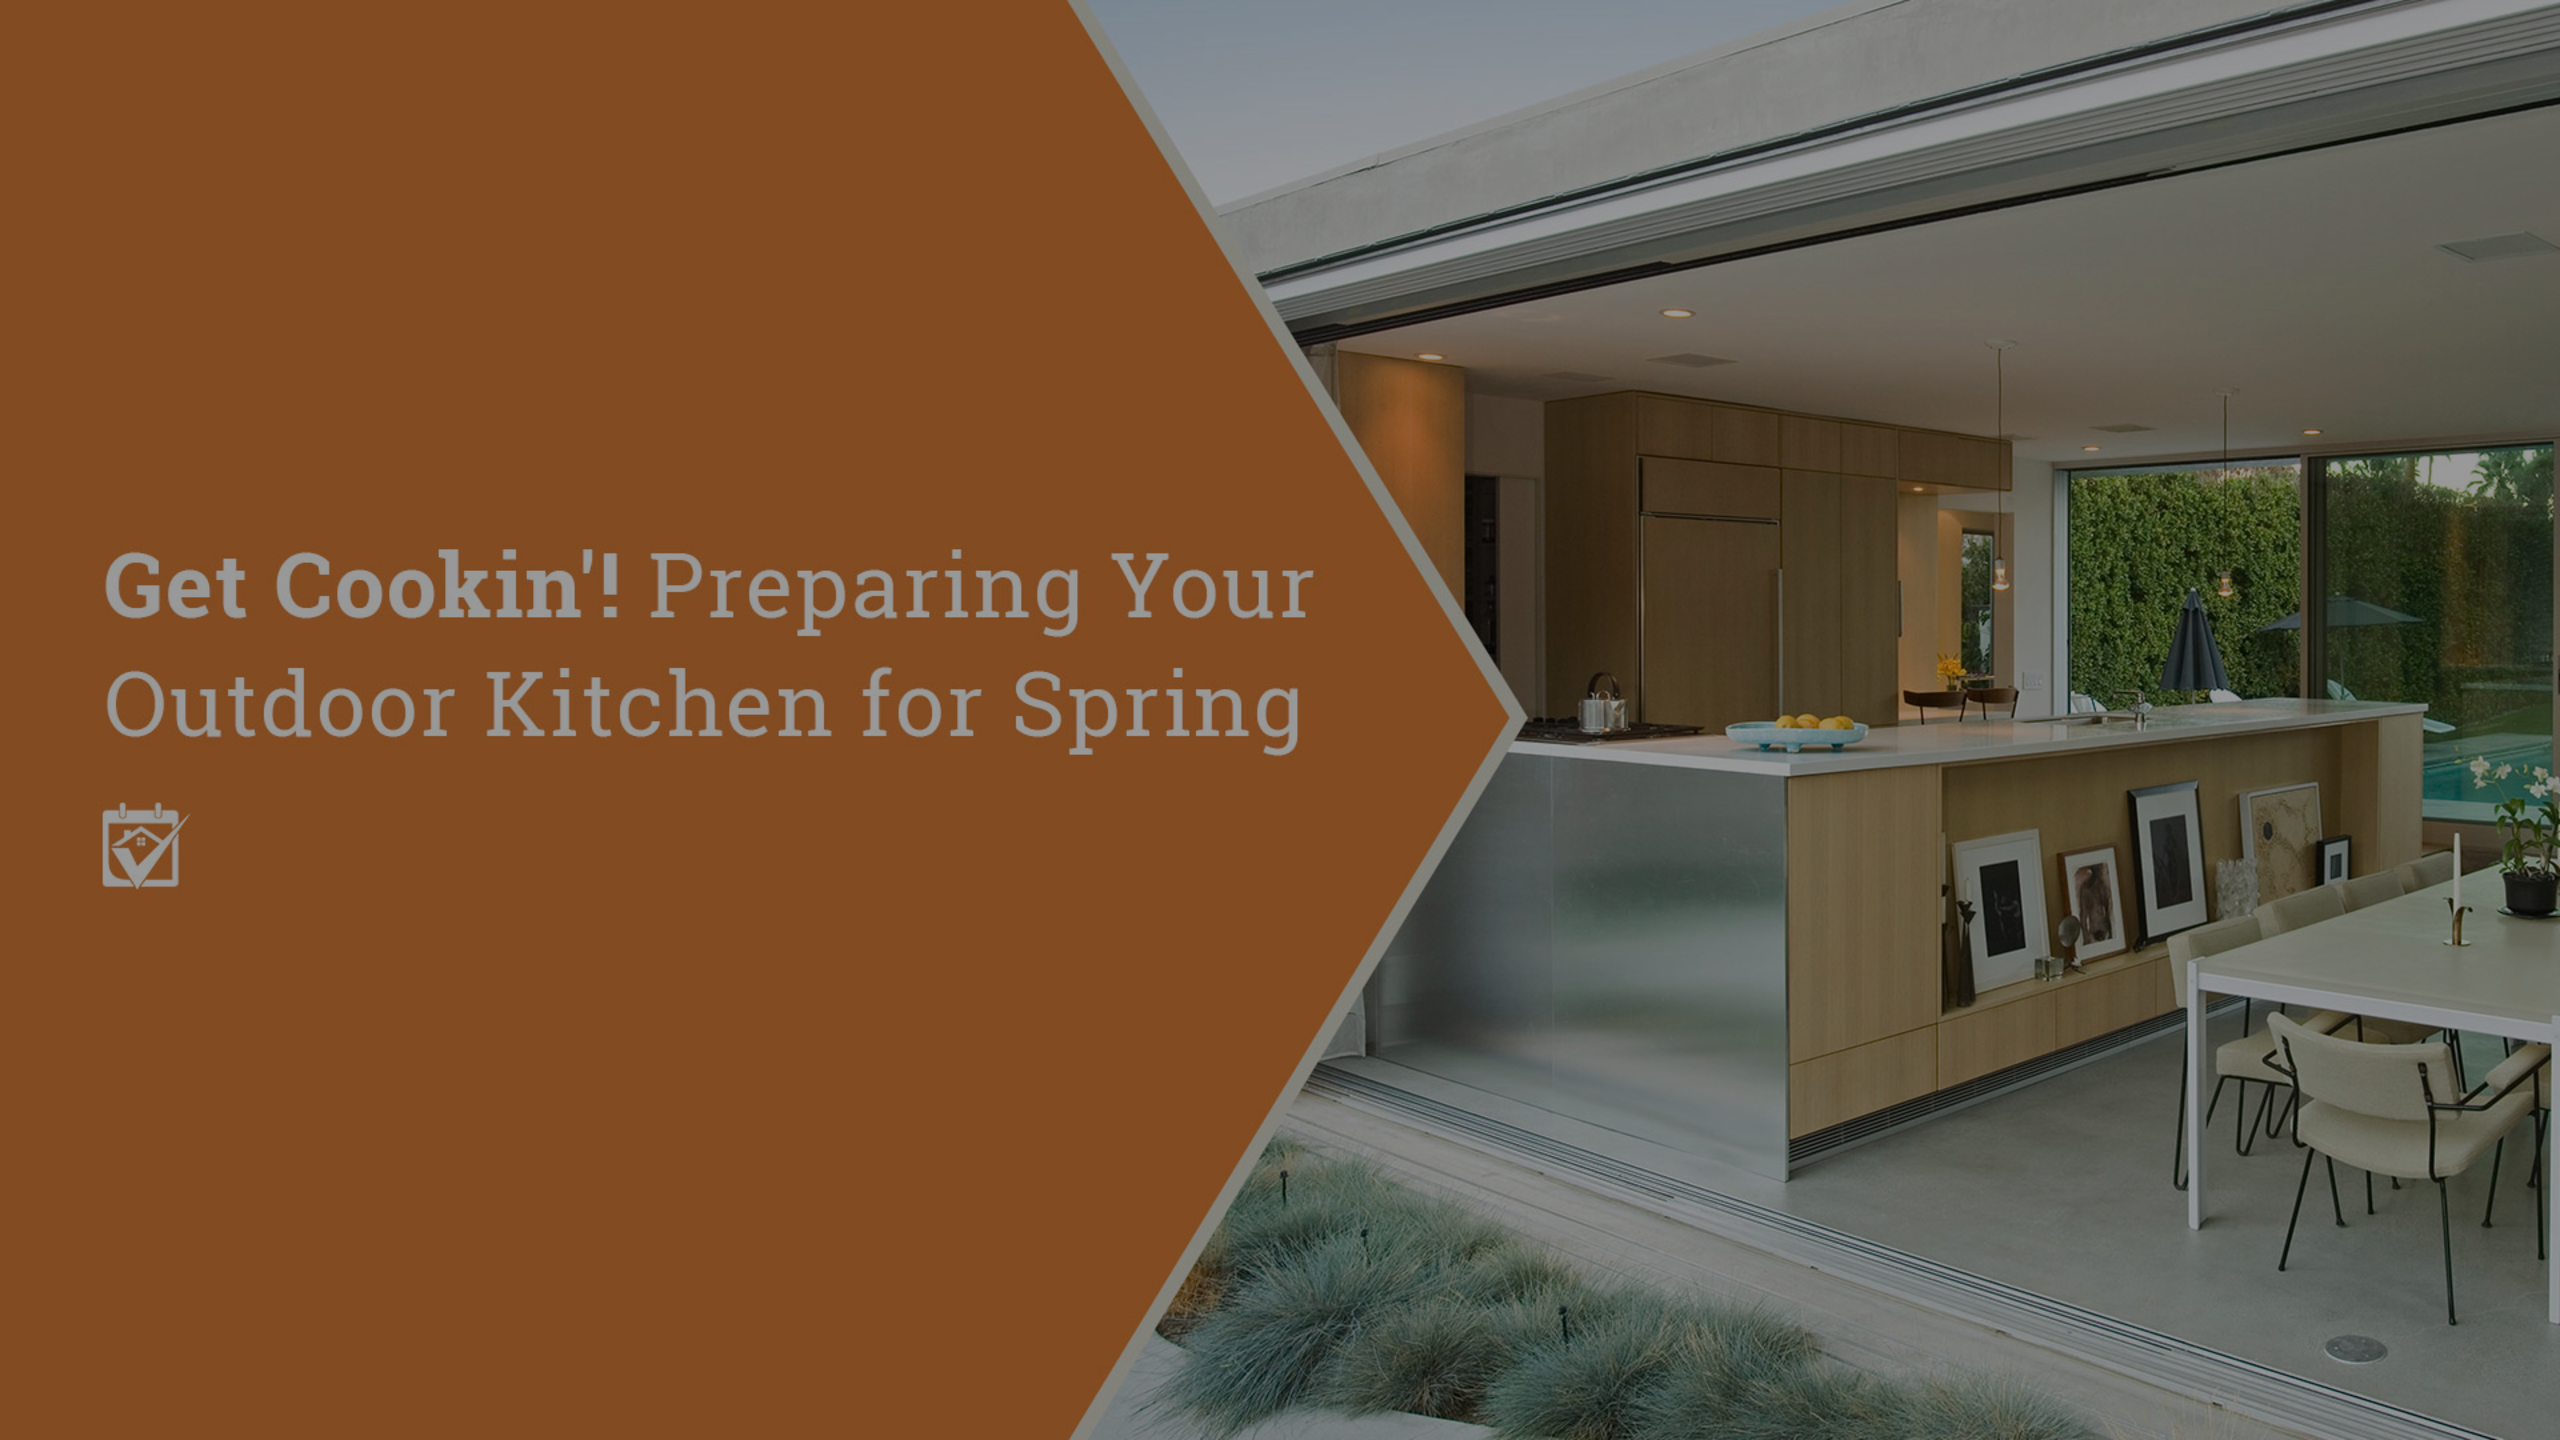 Get Cookin’! Preparing Your Outdoor Kitchen for Spring